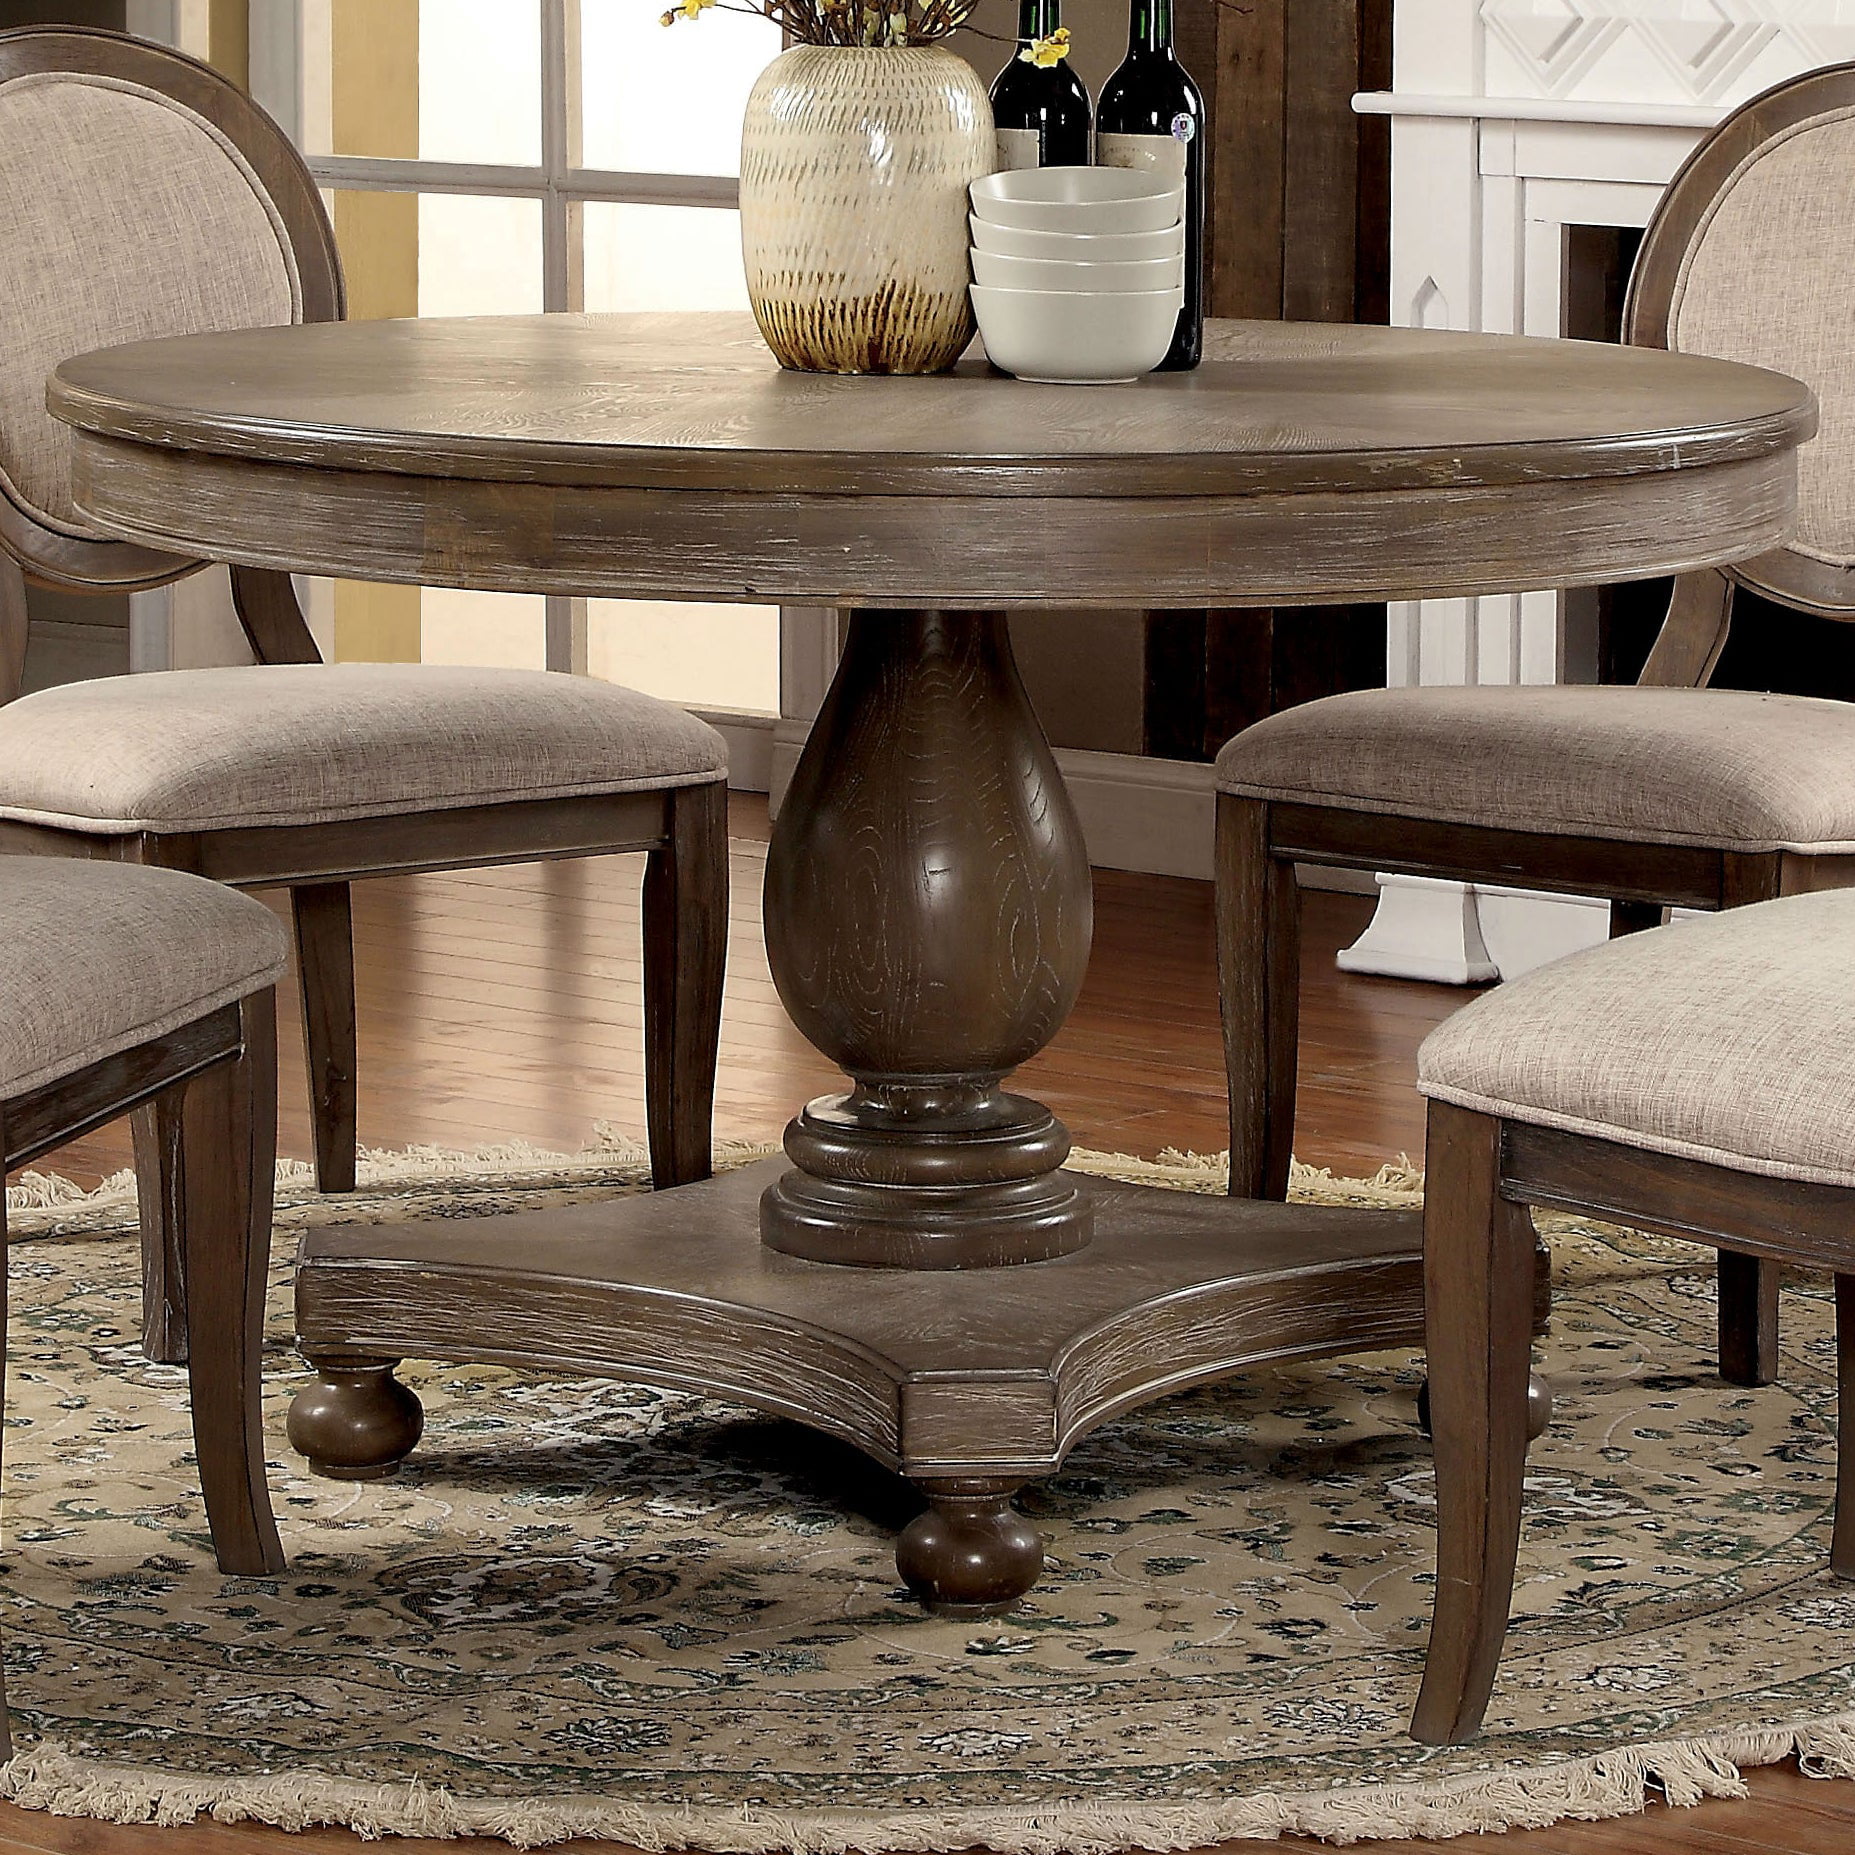 The Gray Barn Louland Falls Rustic 48, 48 Inch Round Pedestal Dining Table Set